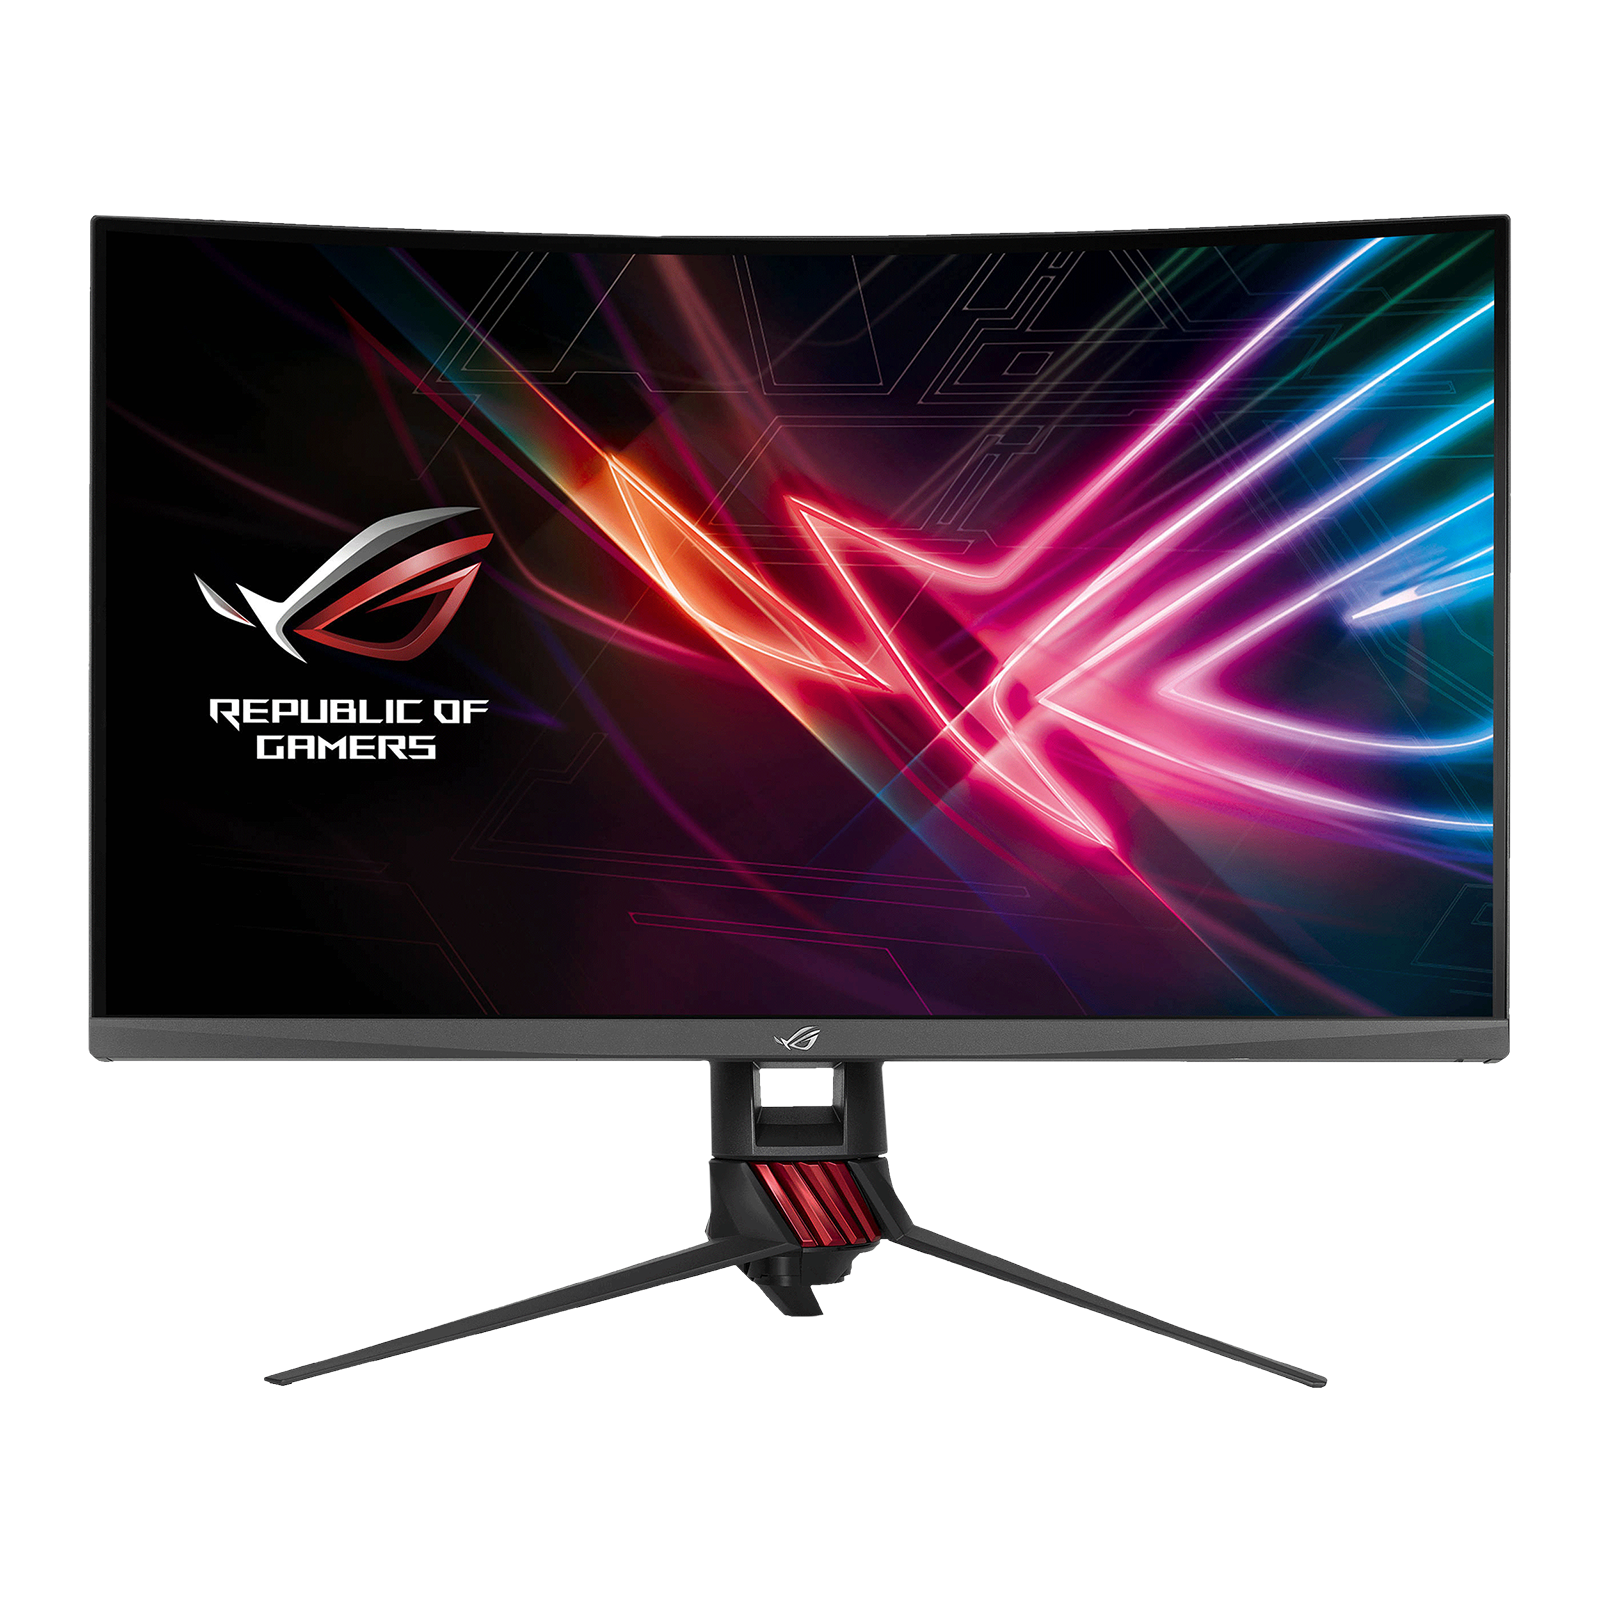 ASUS ROG Strix 81.28 cm (32 inch) WQHD VA Panel LED Curved Height Adjustable Monitor with LED Backlight